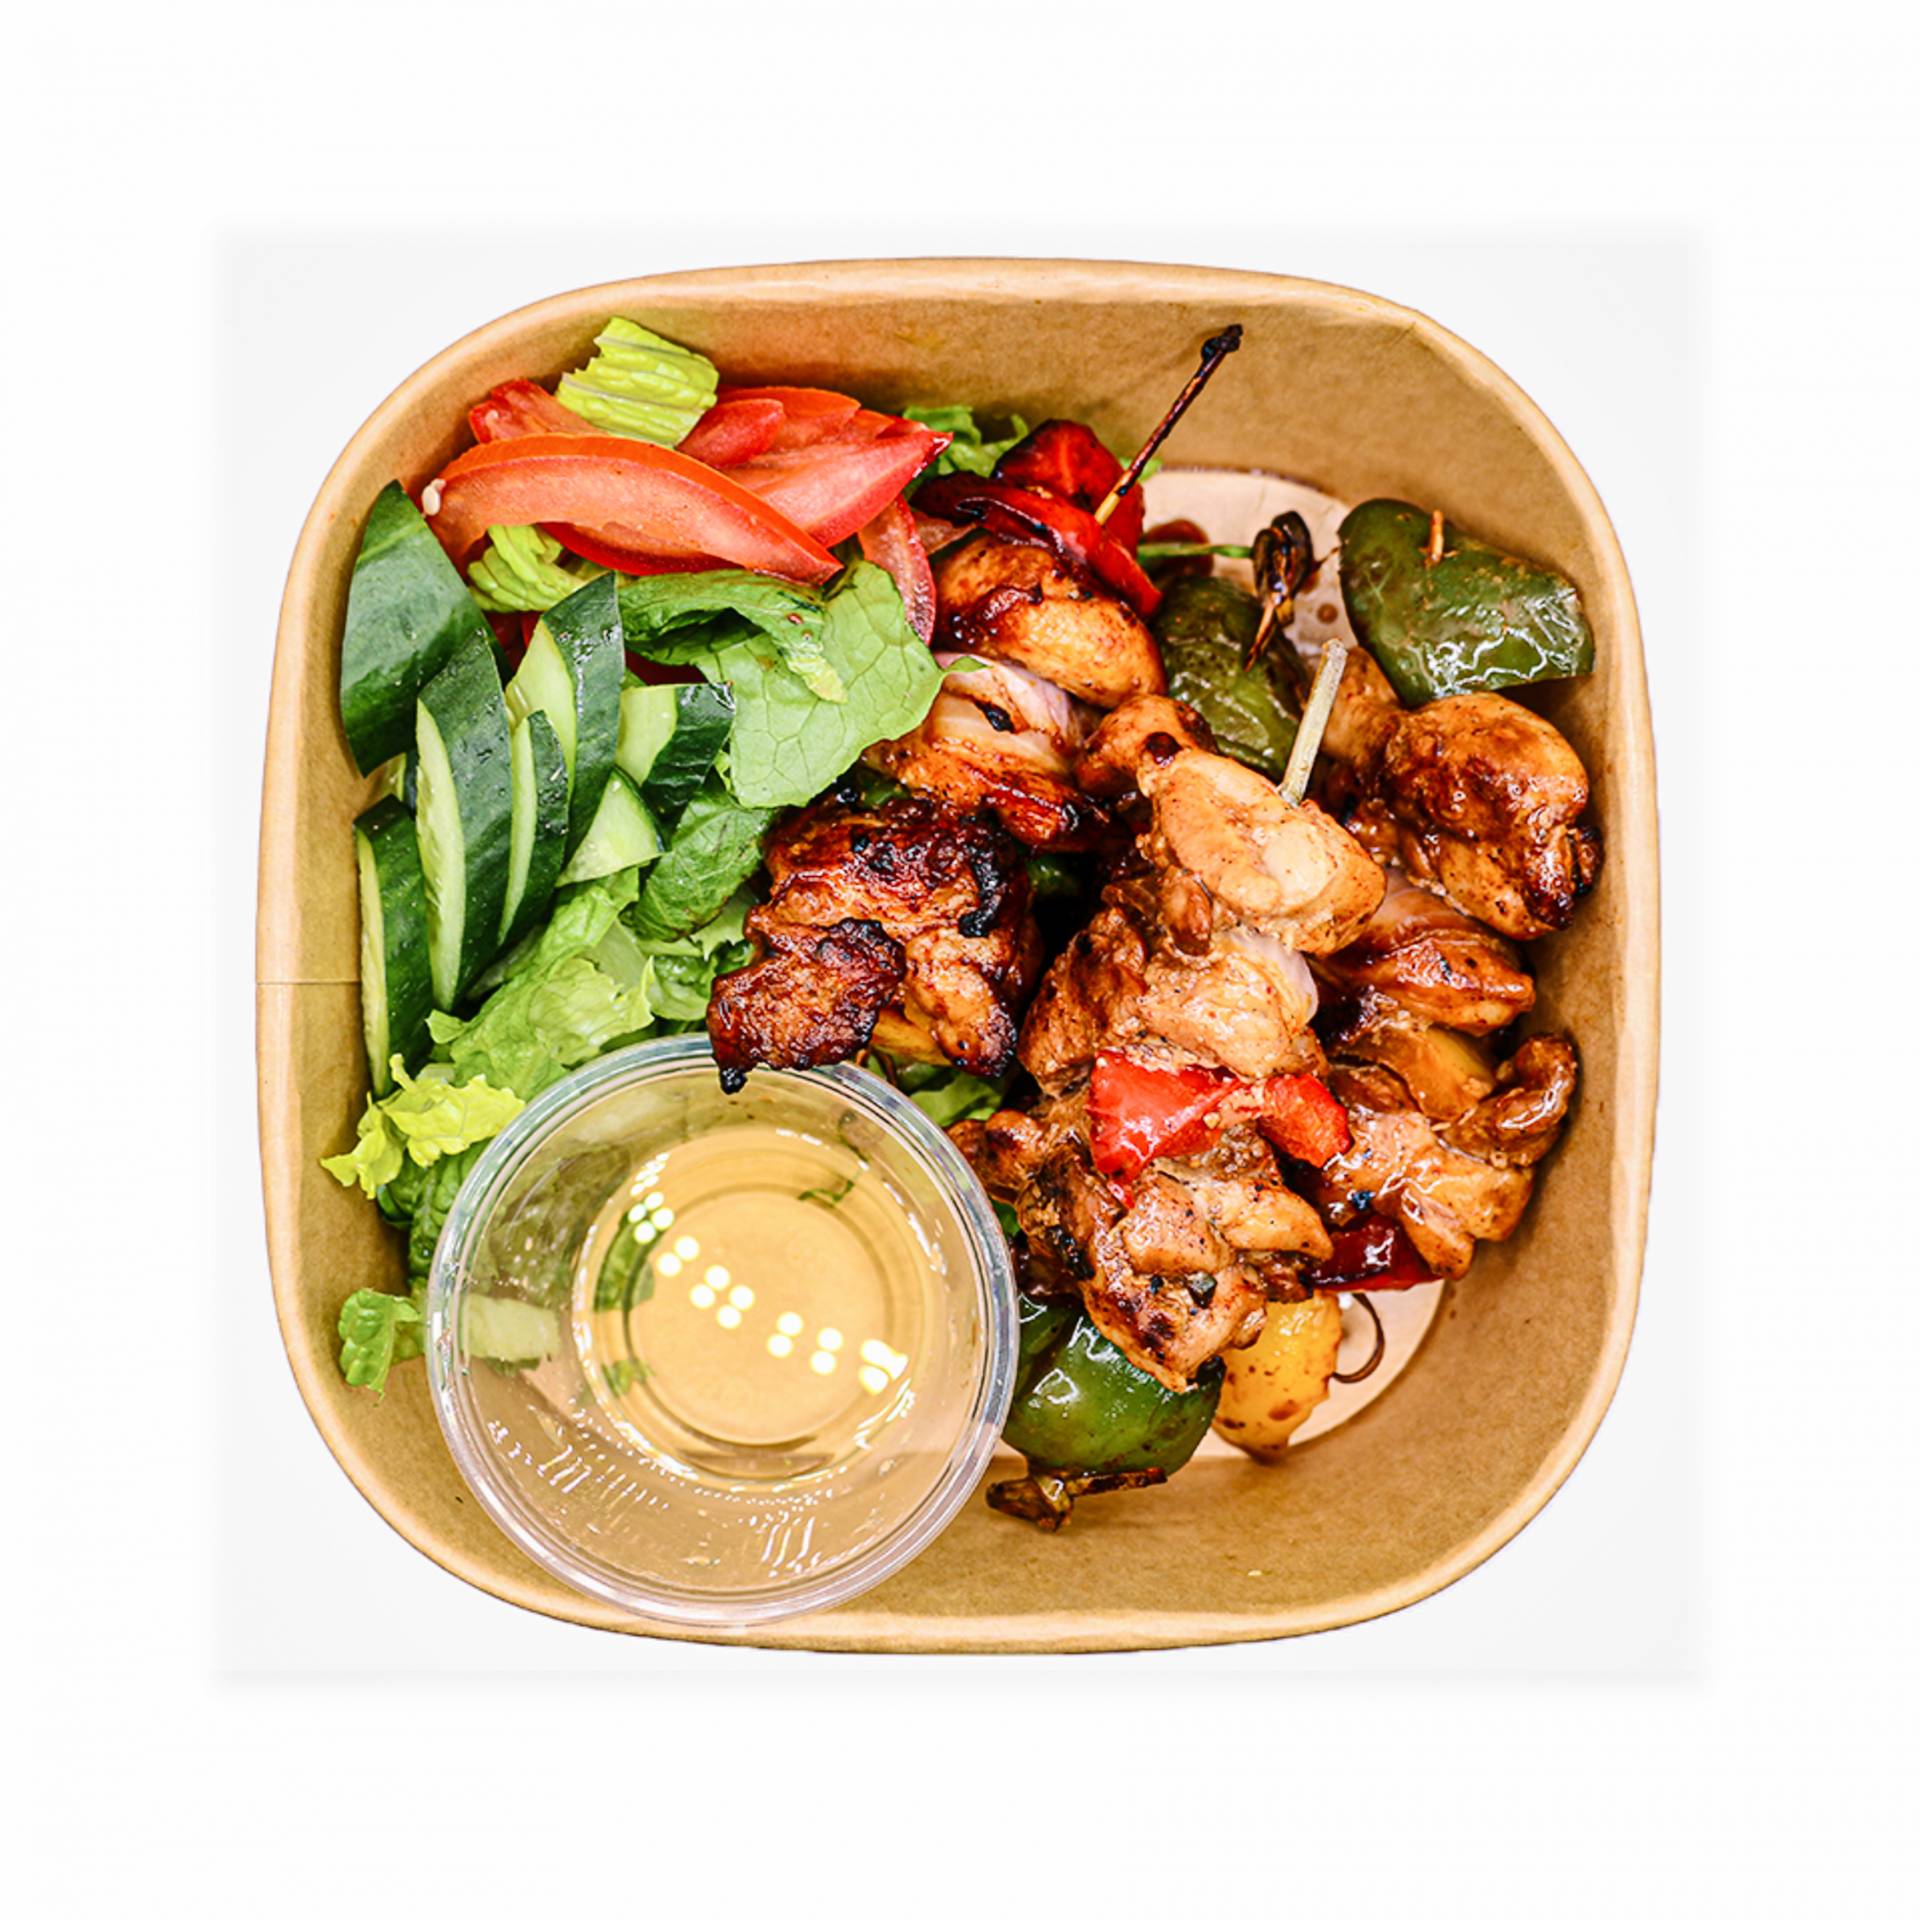 Annie's Famous Chicken Skewers with Salad